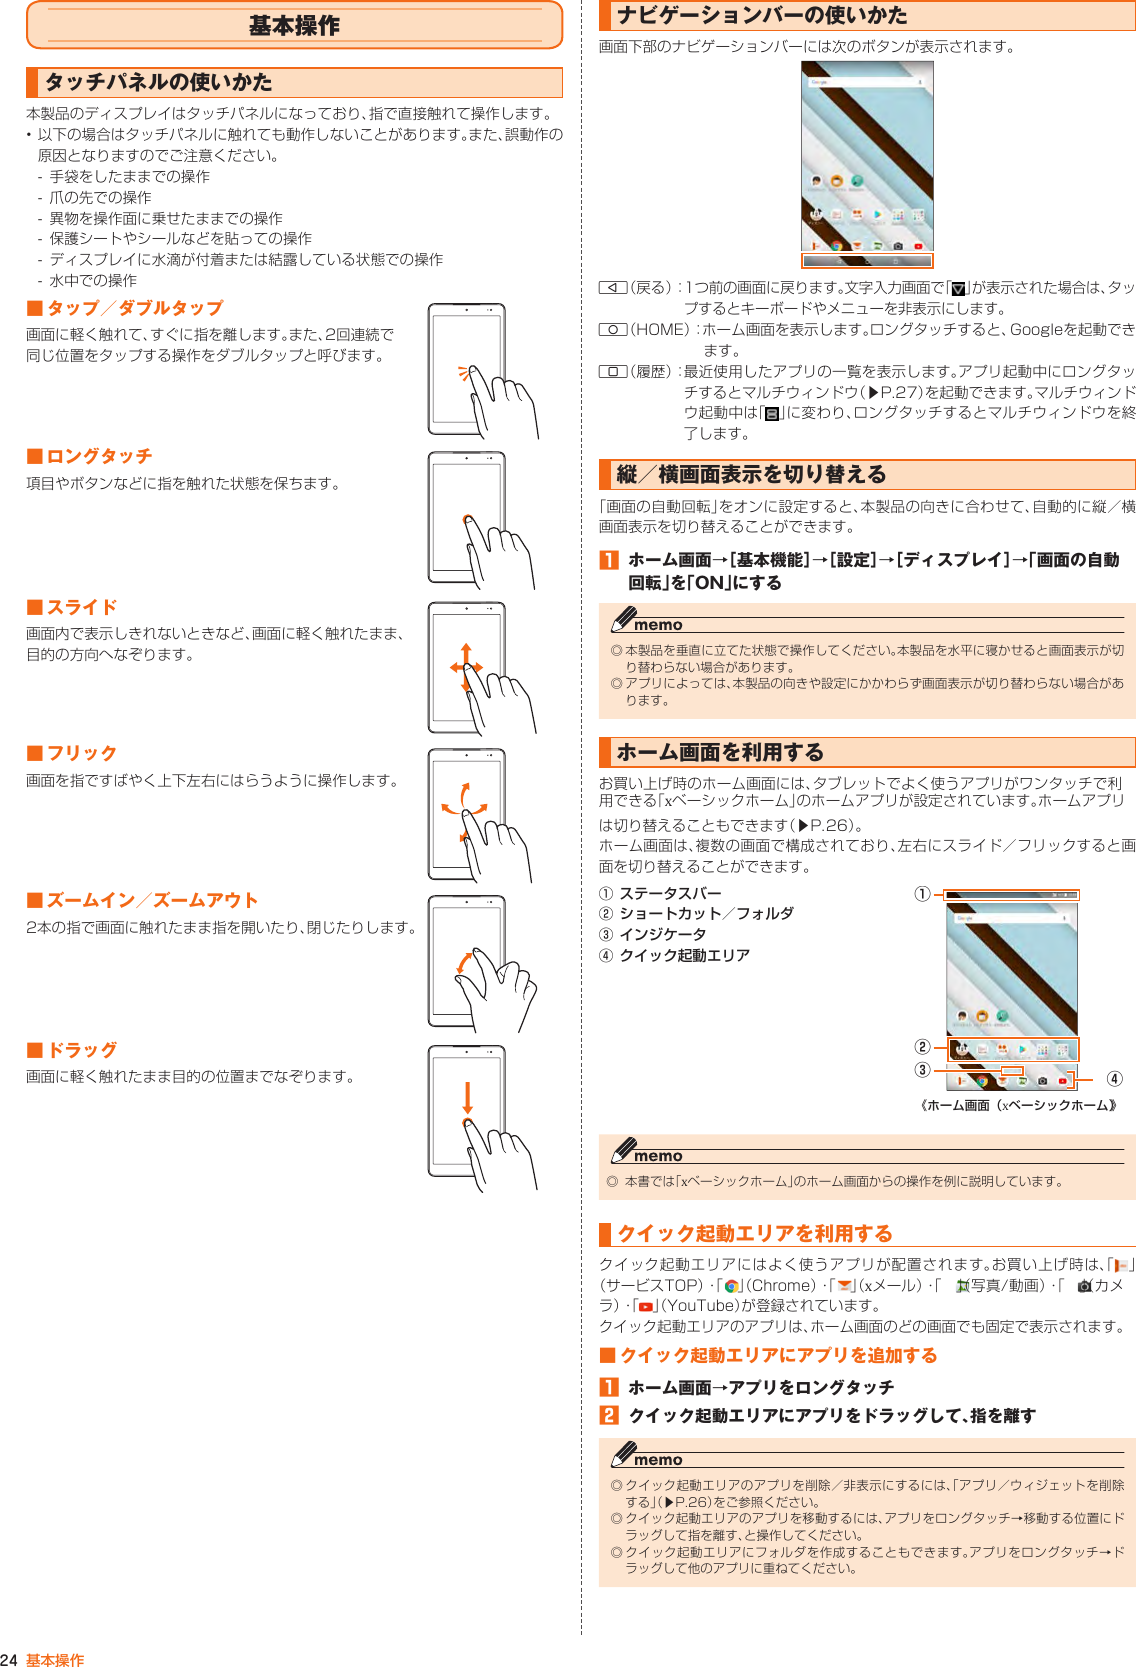 Page 22 of Kyocera FA51 Tablet User Manual part 2